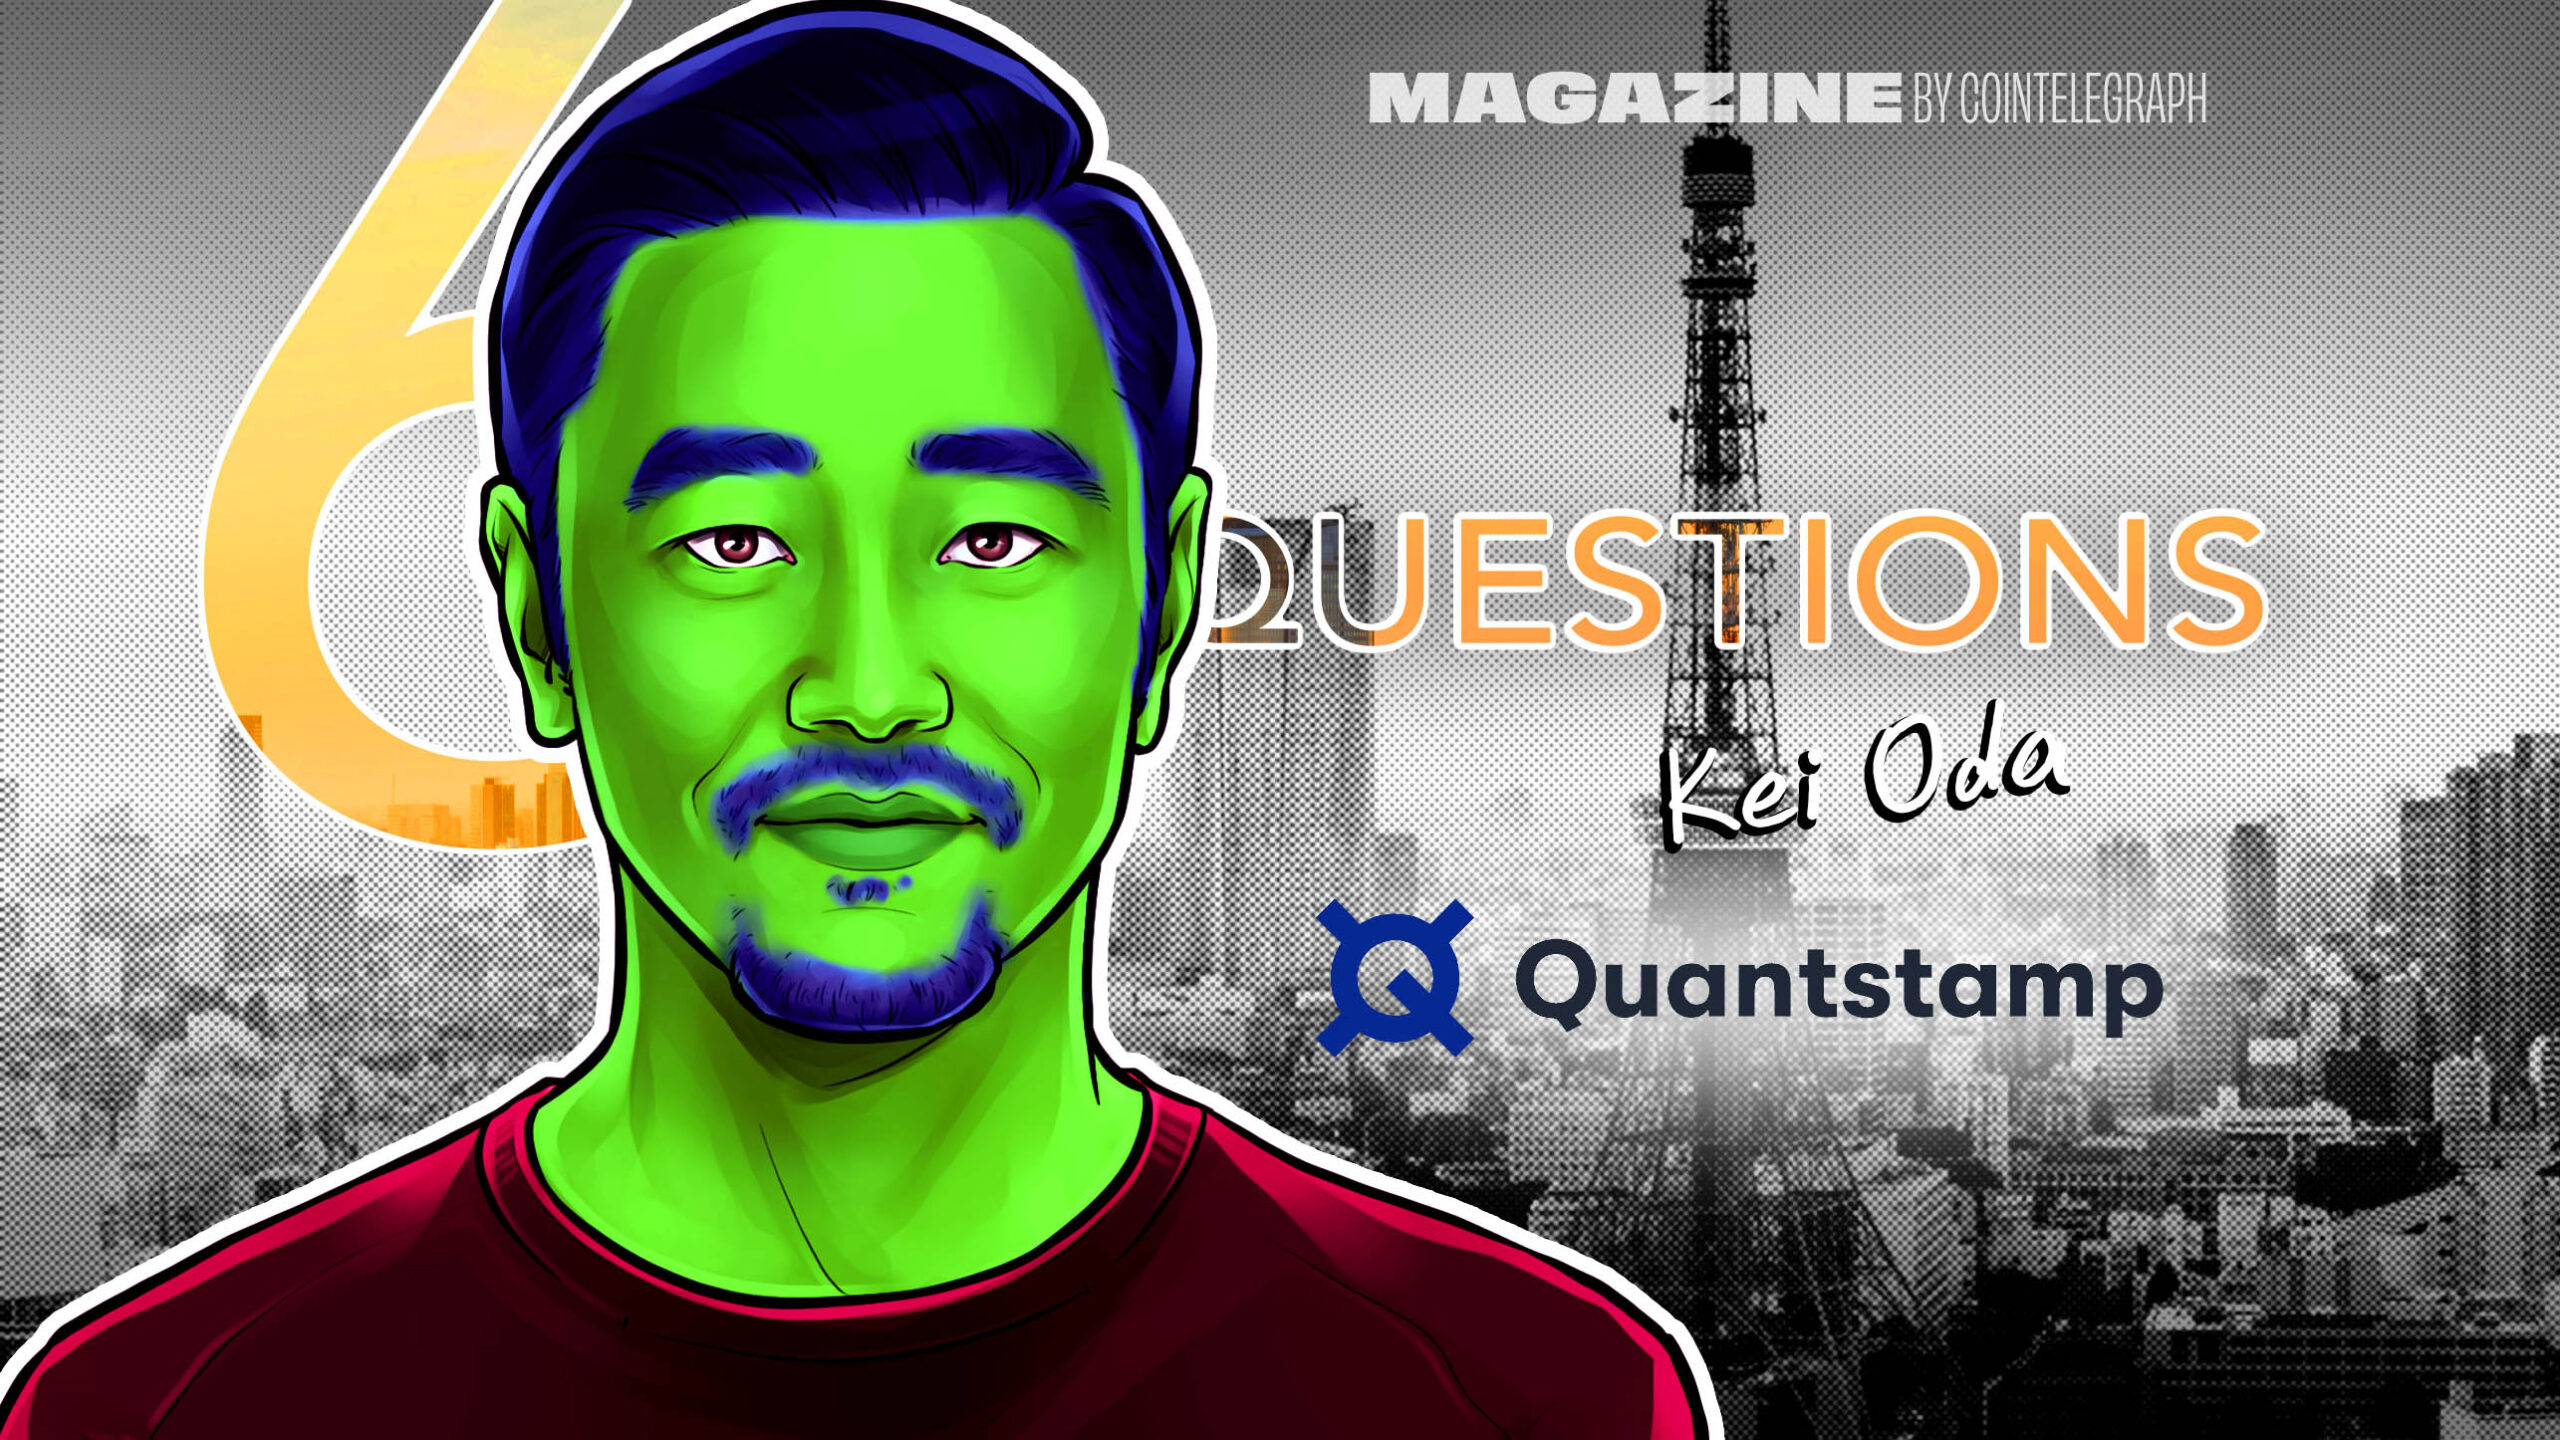 6-questions-for-kei-oda:-from-goldman-sachs-to-cryptocurrency